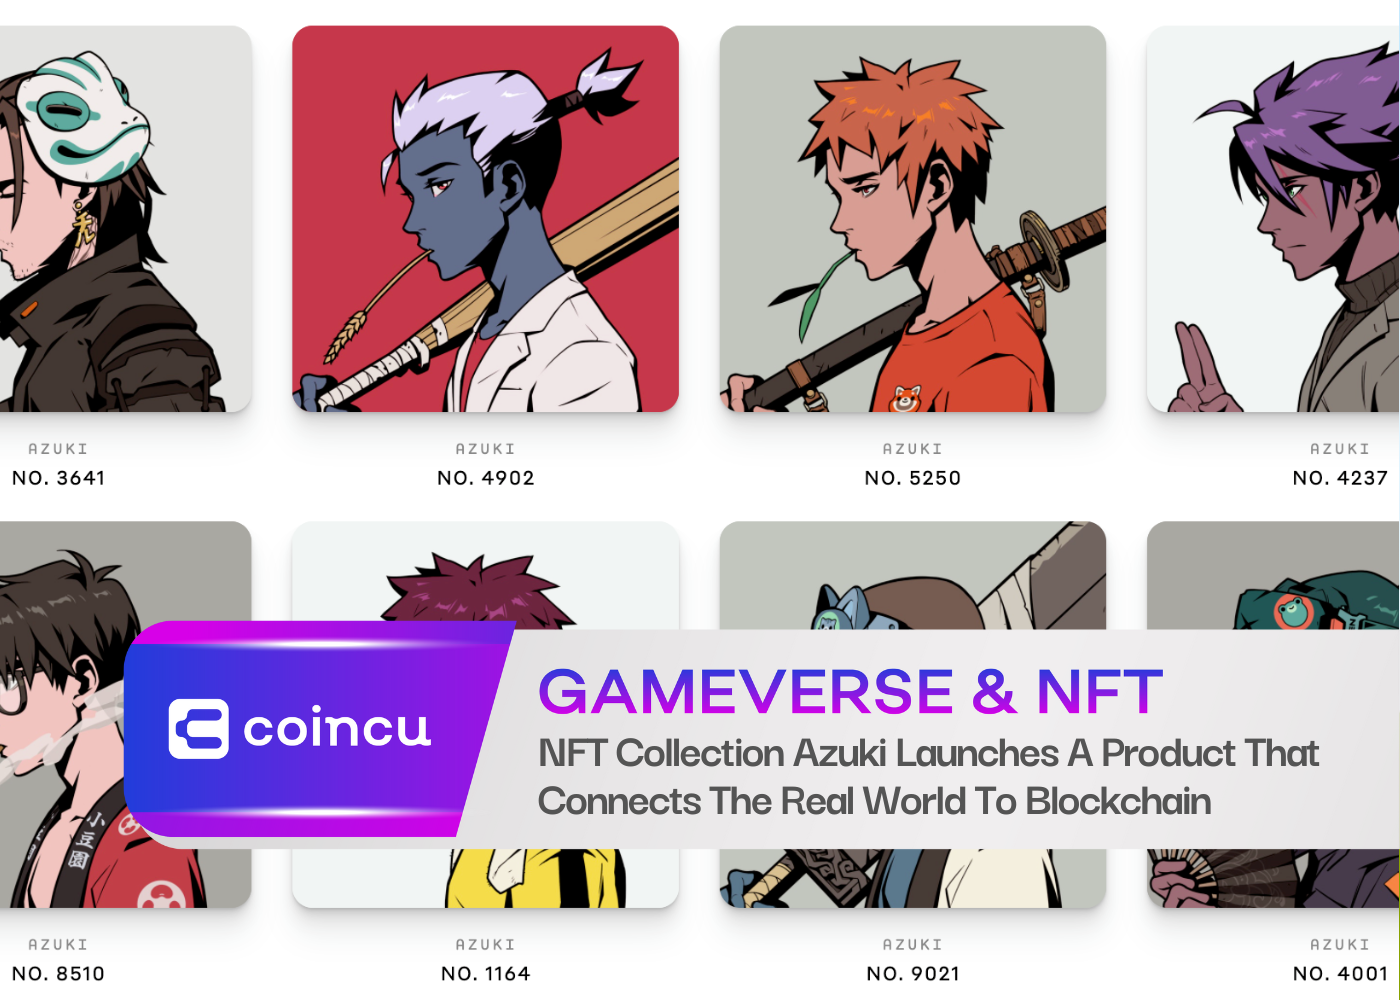 NFT Collection Azuki Launches A Product That Connects The Real World To Blockchain